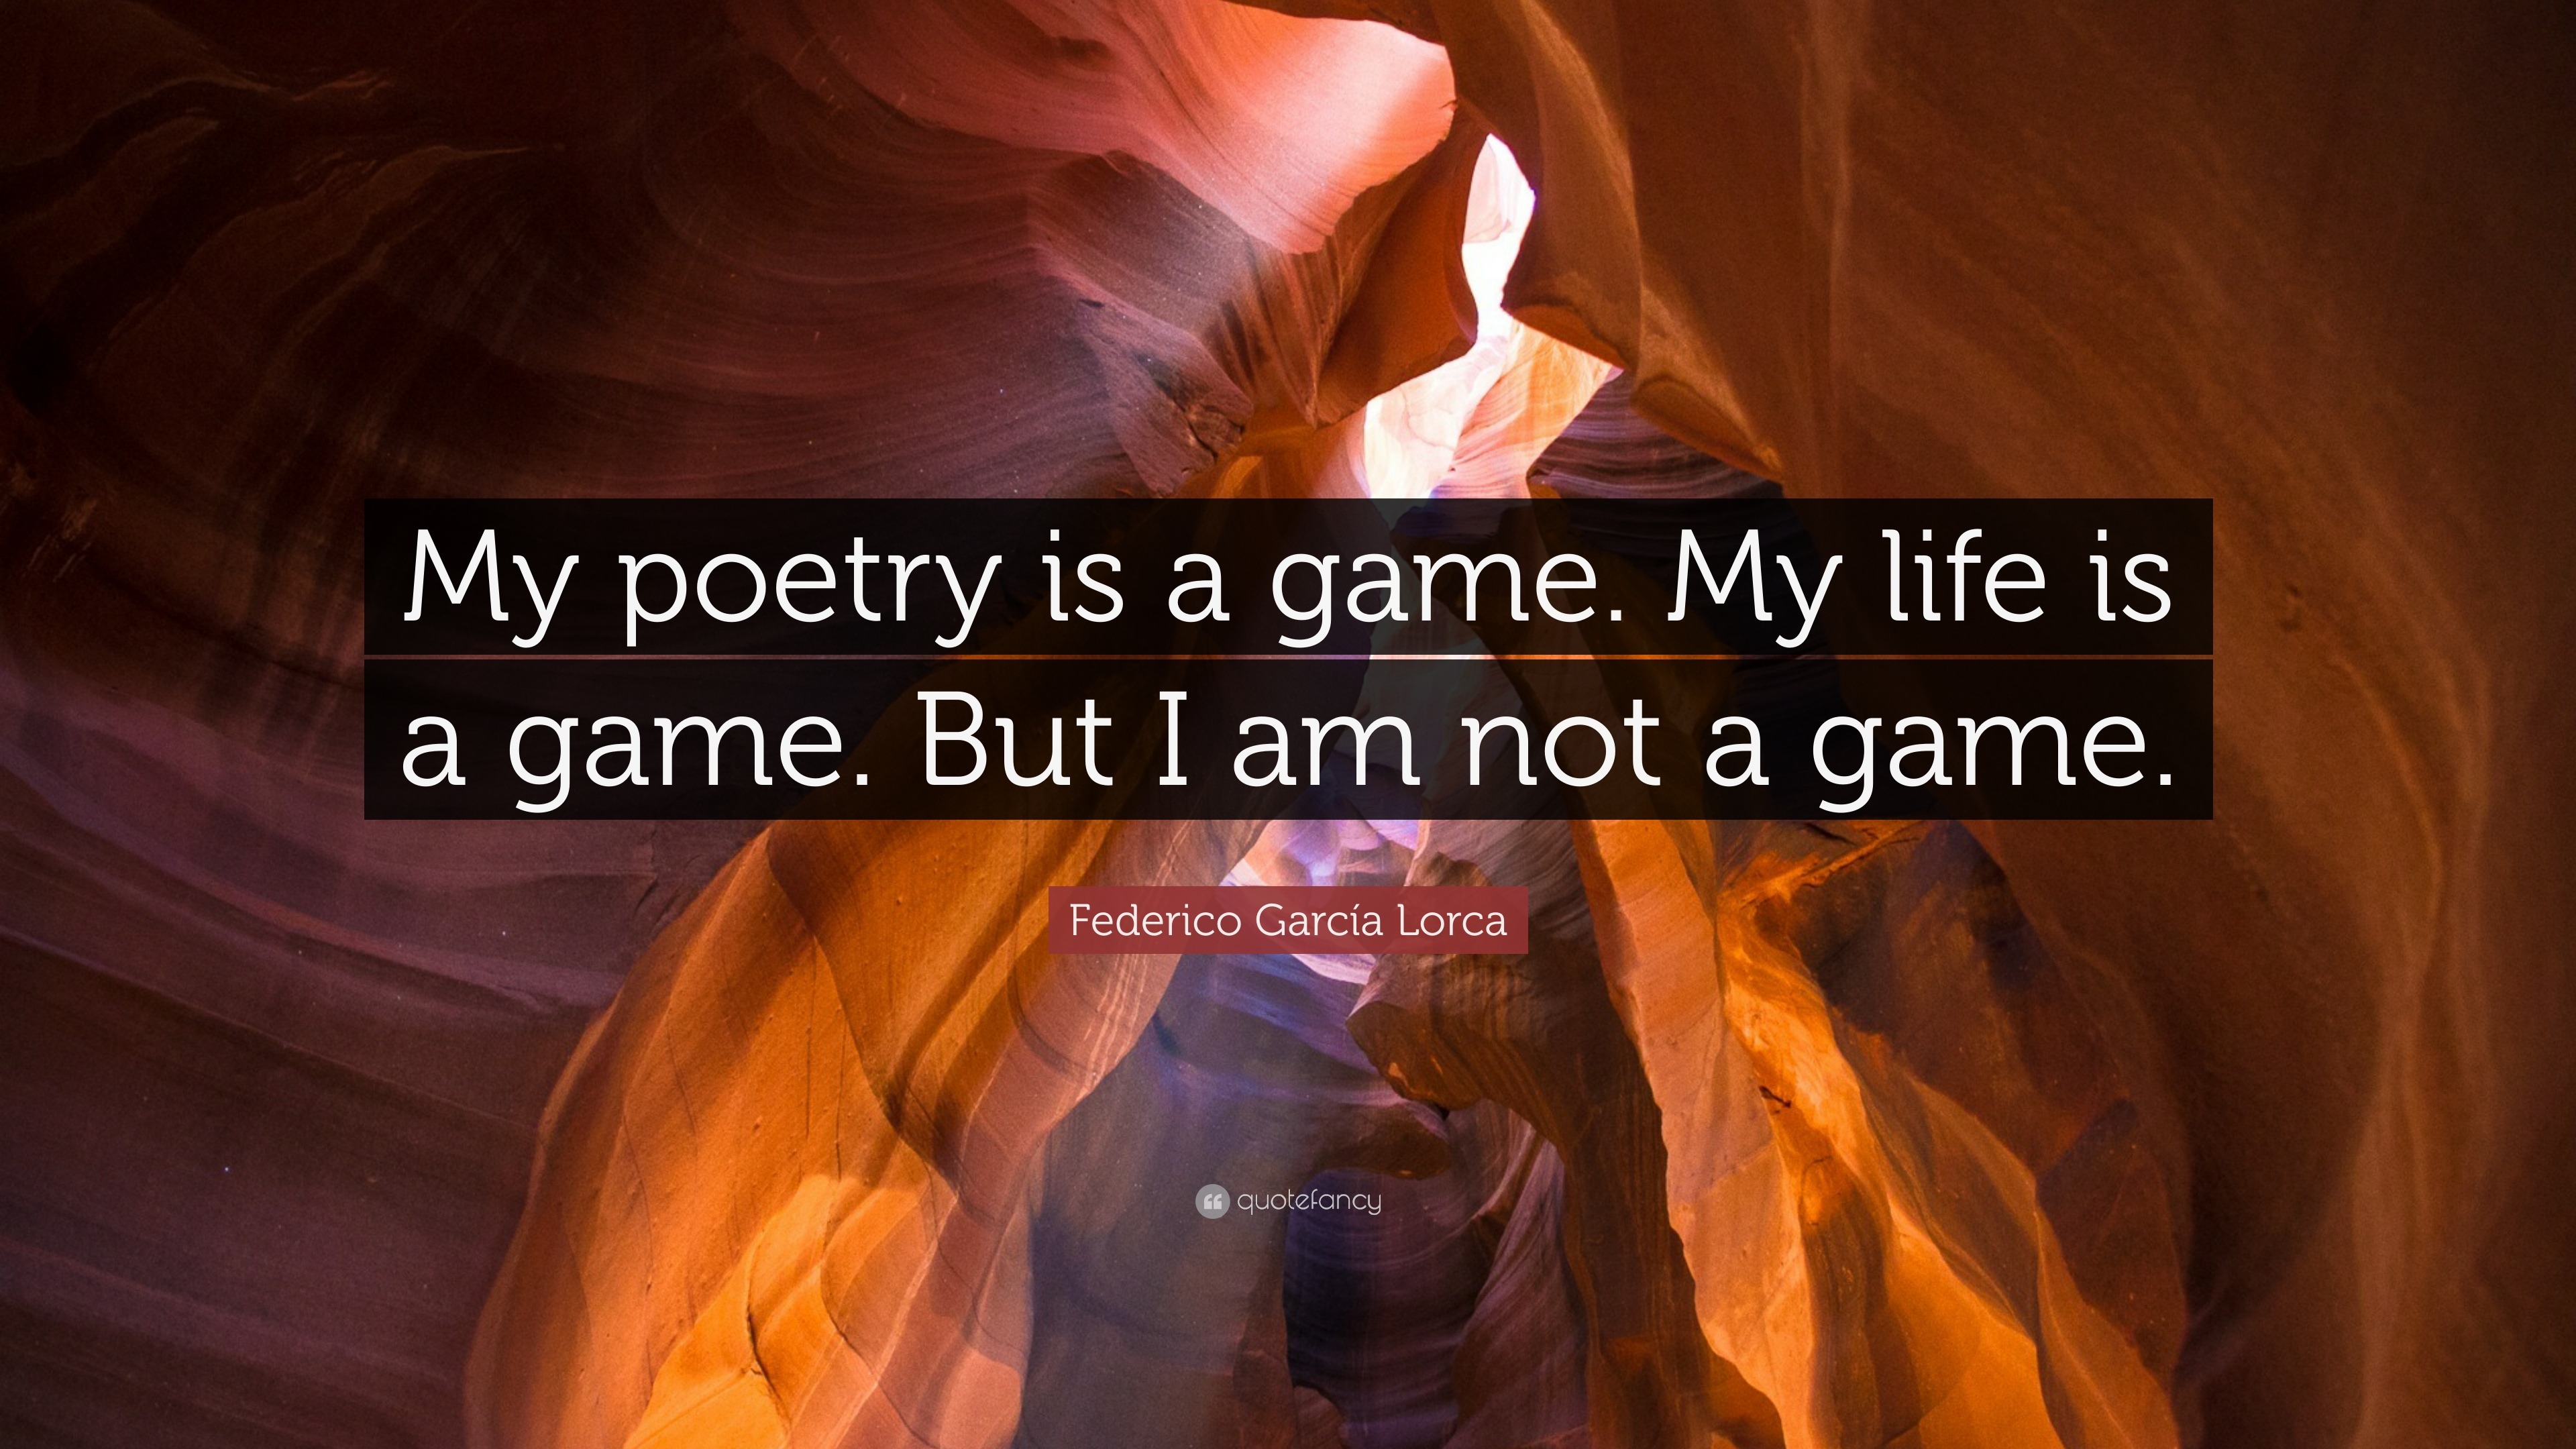 Federico Garcia Lorca Quote My Poetry Is A Game My Life Is A Game But I Am Not A Game 7 Wallpapers Quotefancy